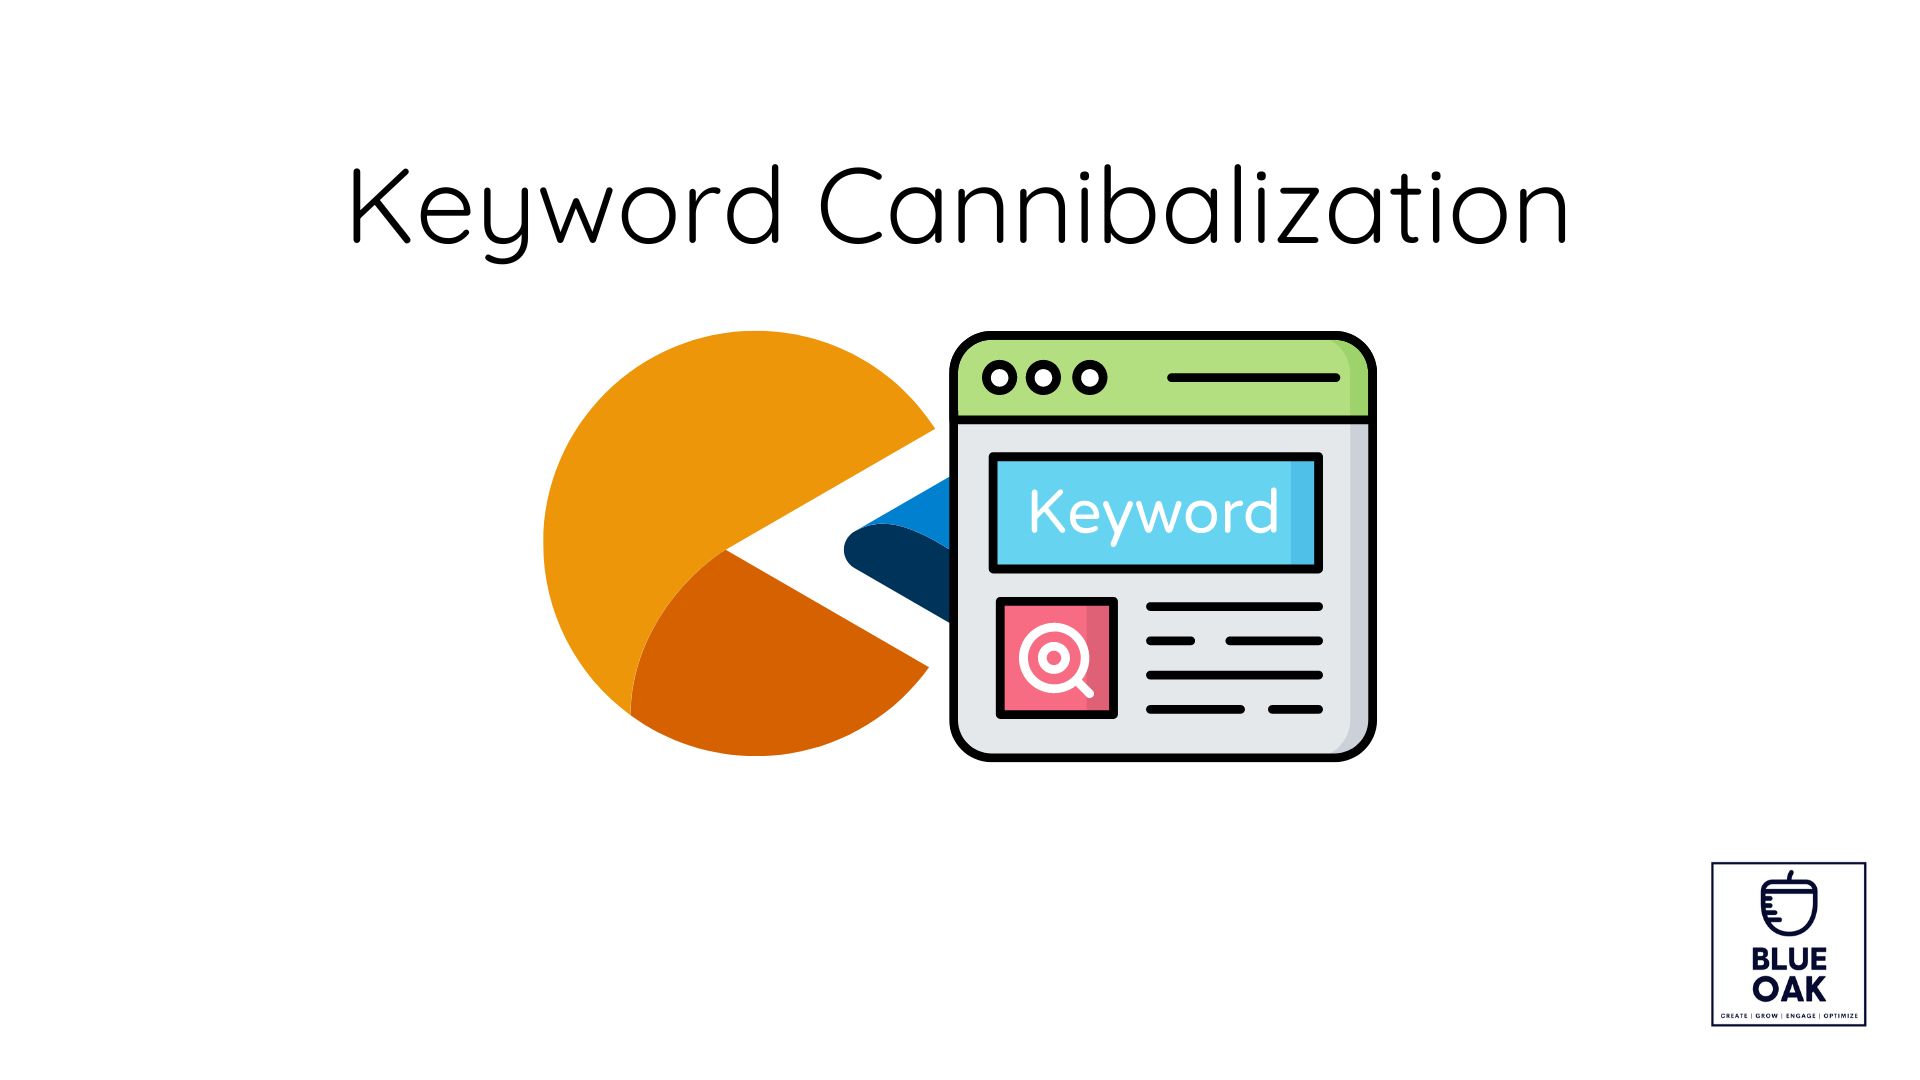 What is Keyword Cannibalization in SEO?